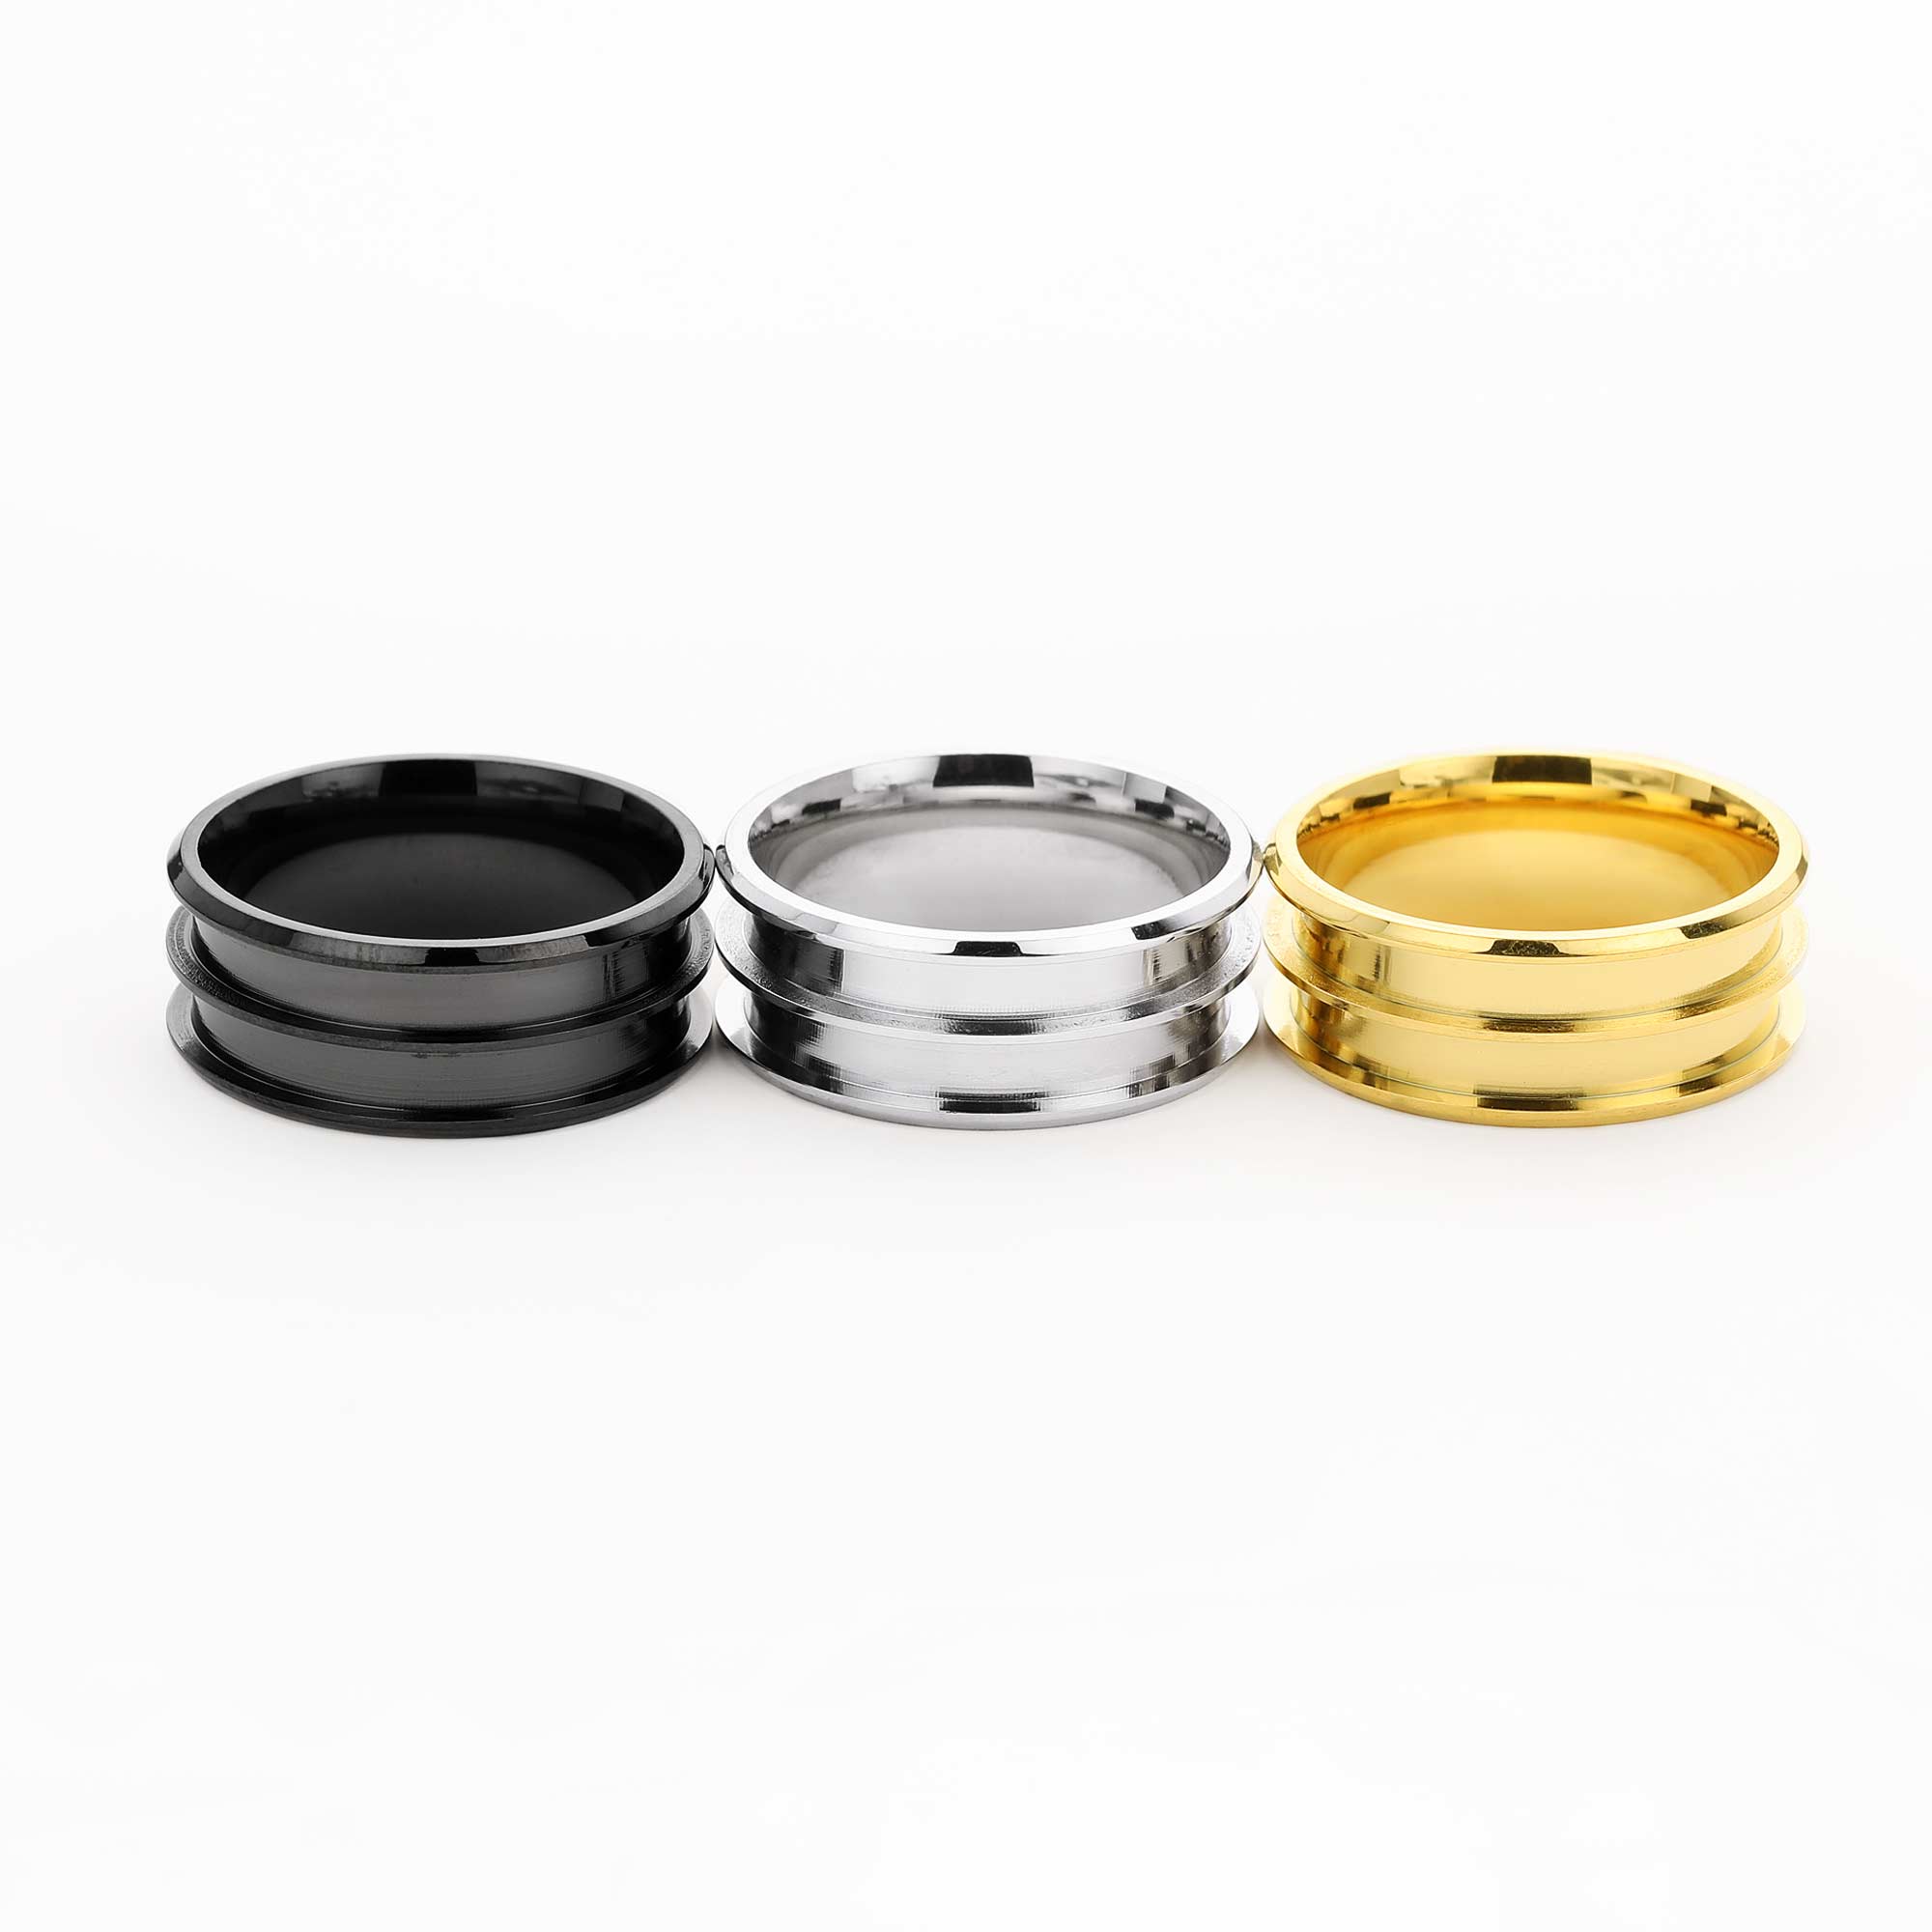 Keepsake Mens' Resin Ashes Channel Ring Settings,Double Channel Bezel Stainless Steel Ring Setting,Silver Gold DIY Ring Supplies,2.6MM Width Each Channel 1294594 - Click Image to Close